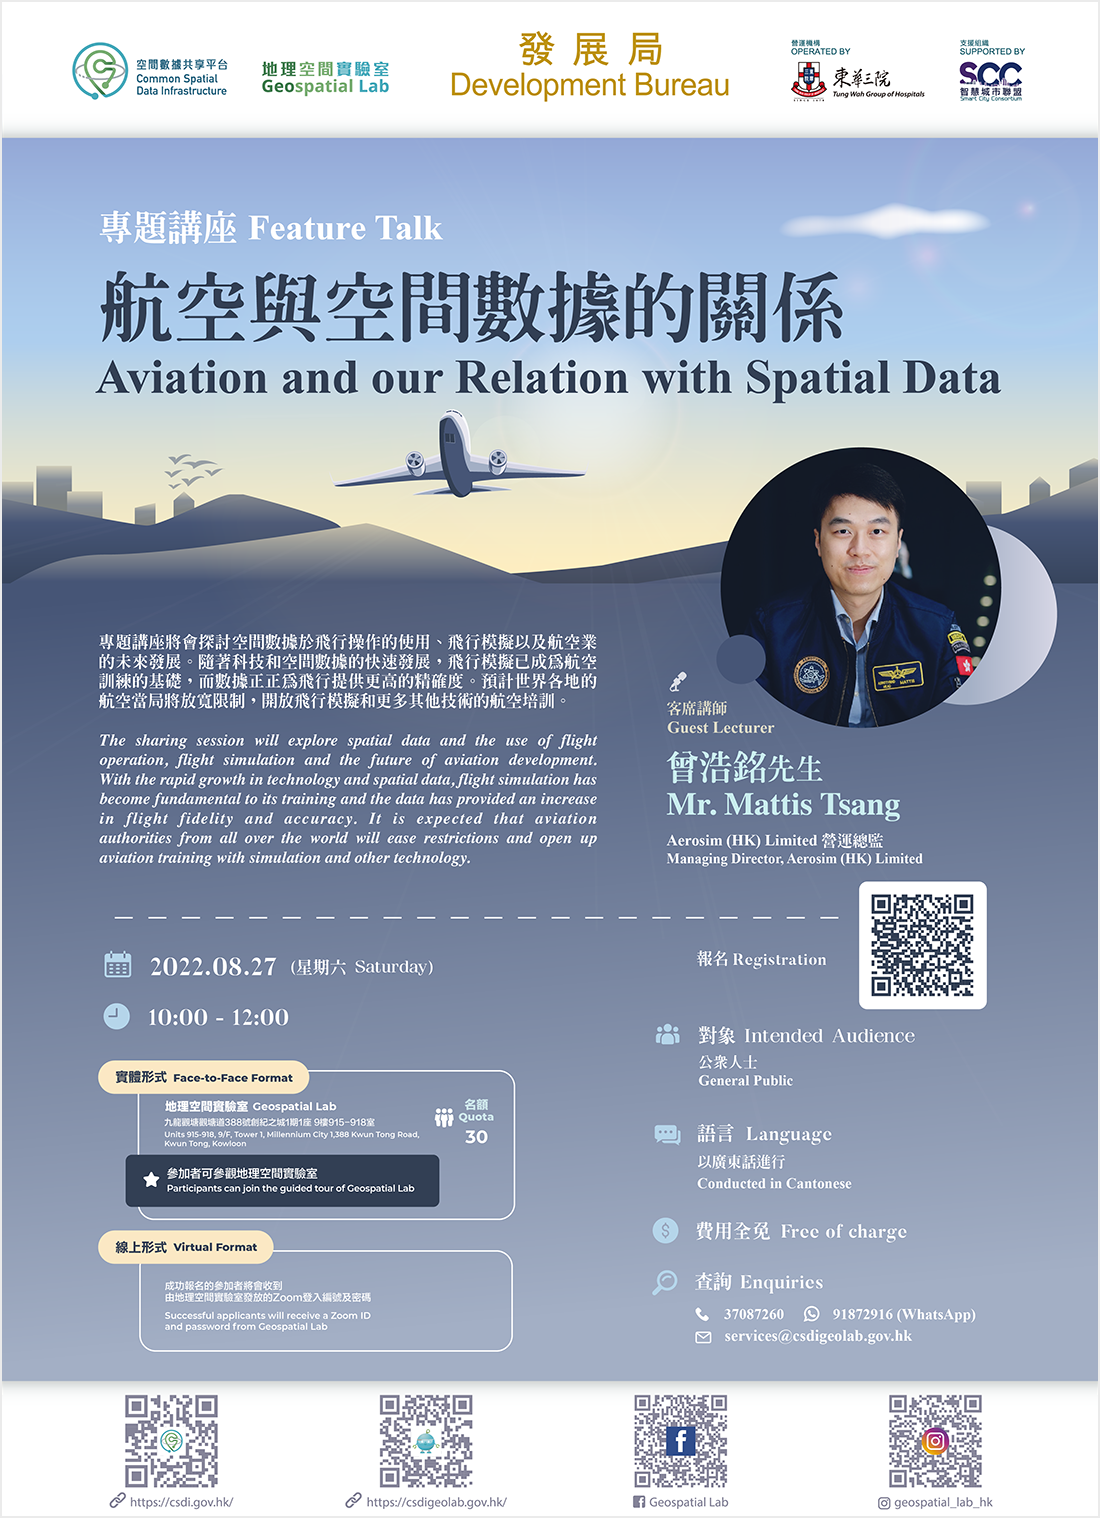 Feature Talk - Aviation and Our Relation with Spatial Data